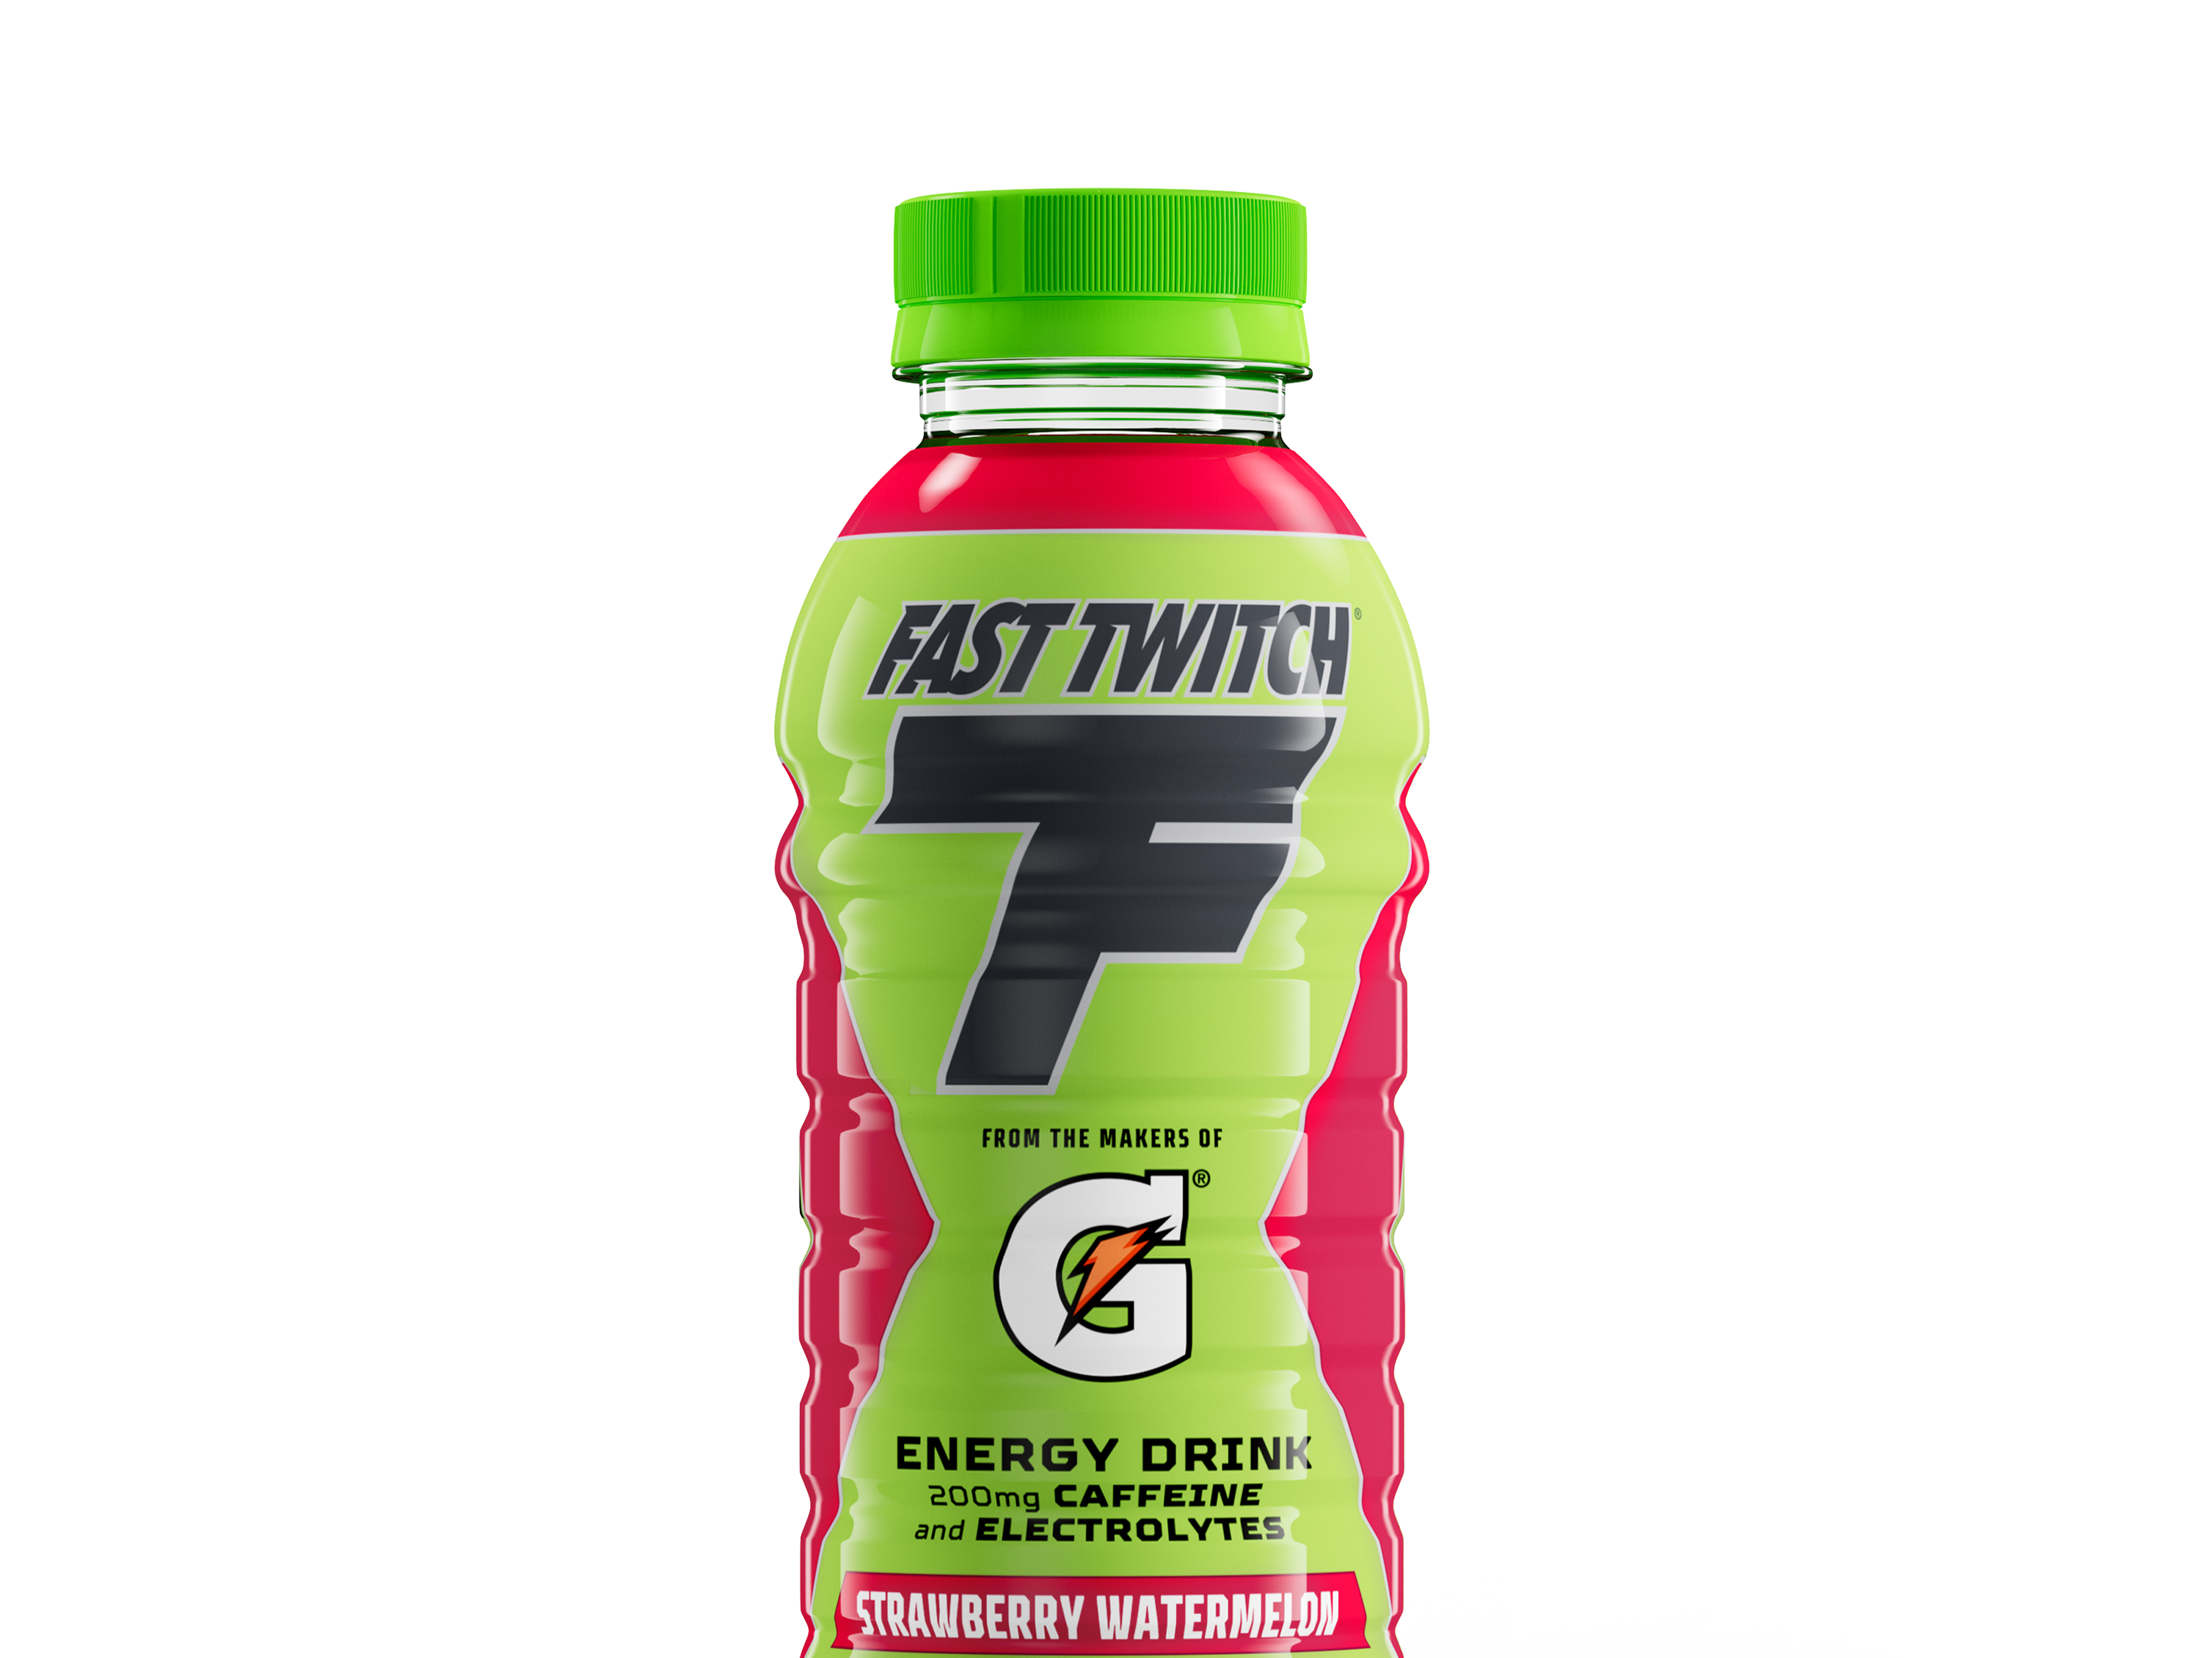 Fast Twitch ready to drink Stawberry Watermelon